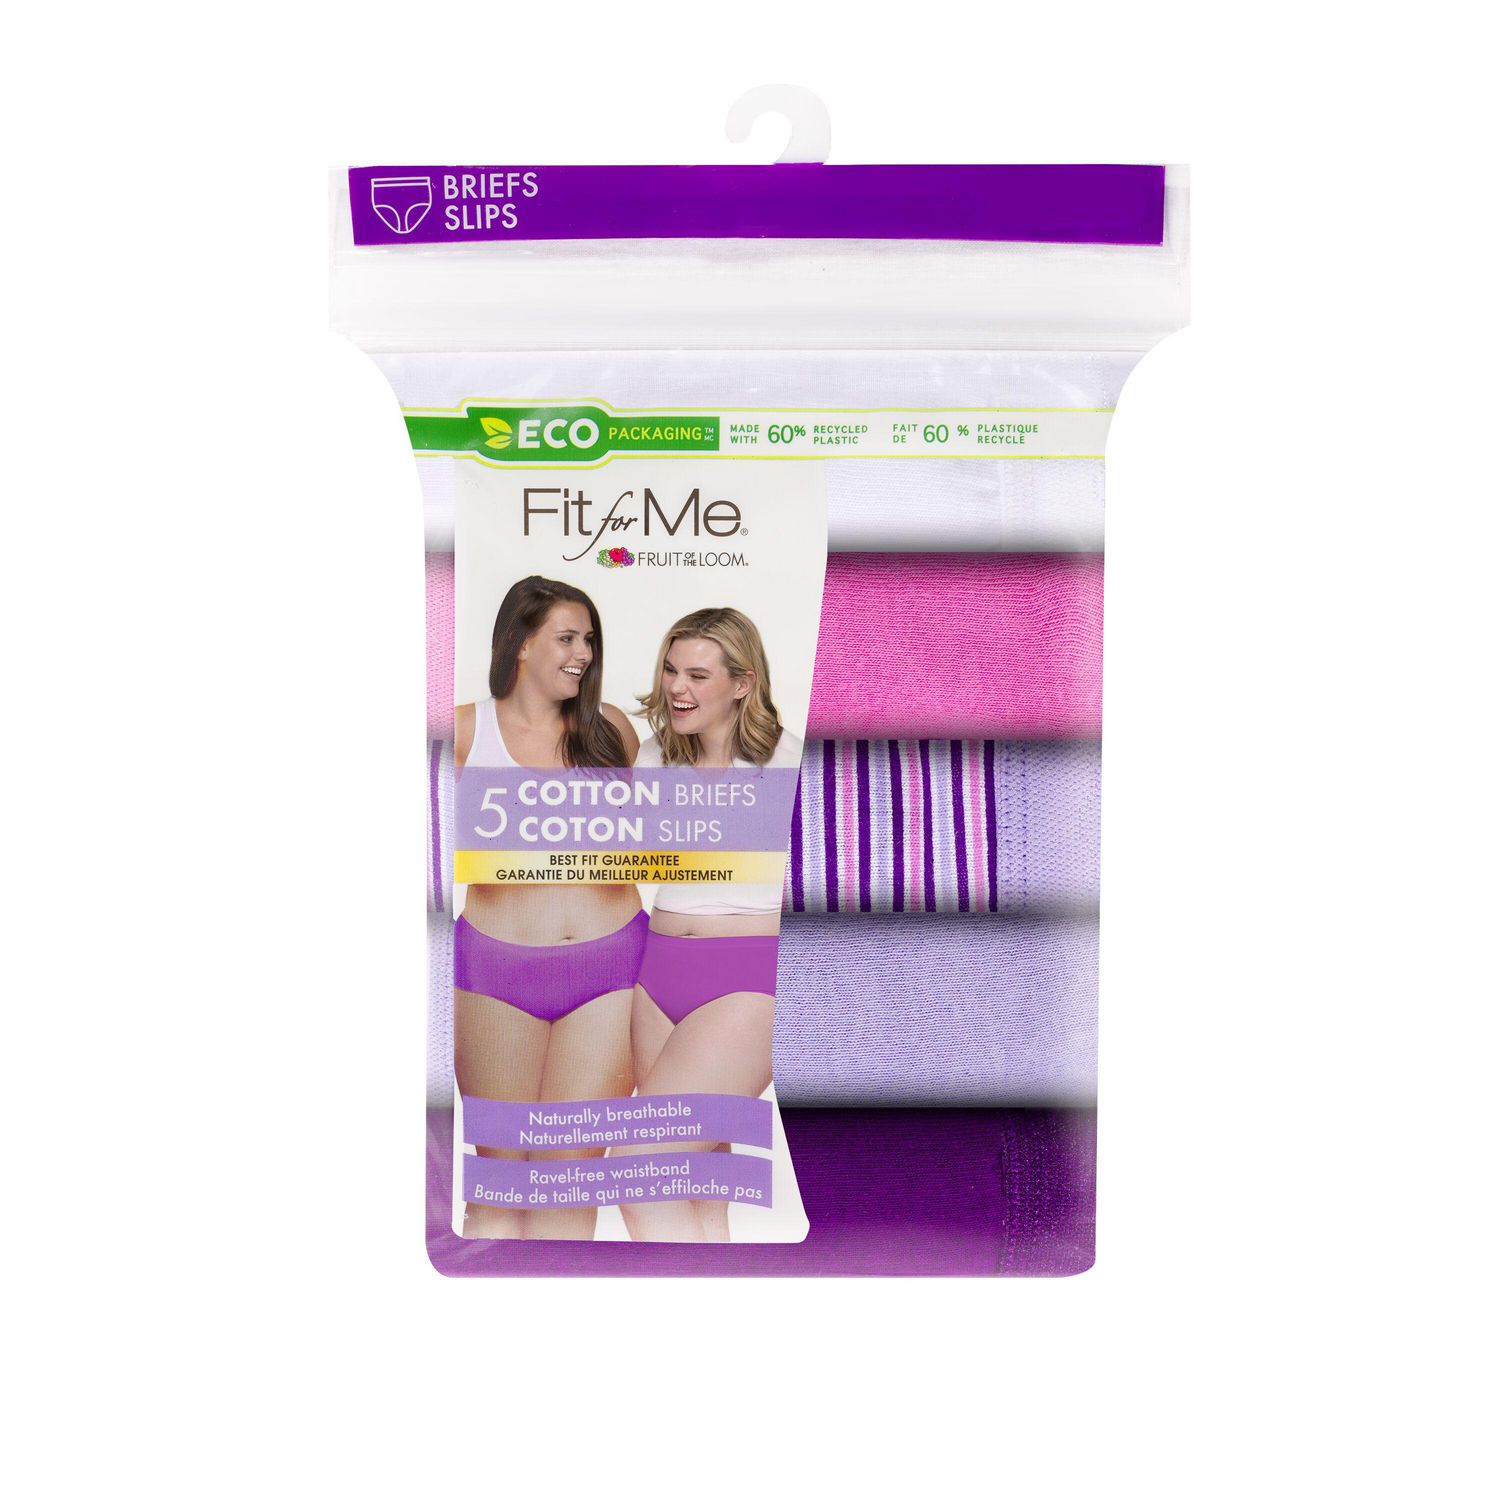 FRUIT OF THE LOOM FIT FOR ME 20 PK WHITE WOMAN'S BRIEFS 100% COTTON